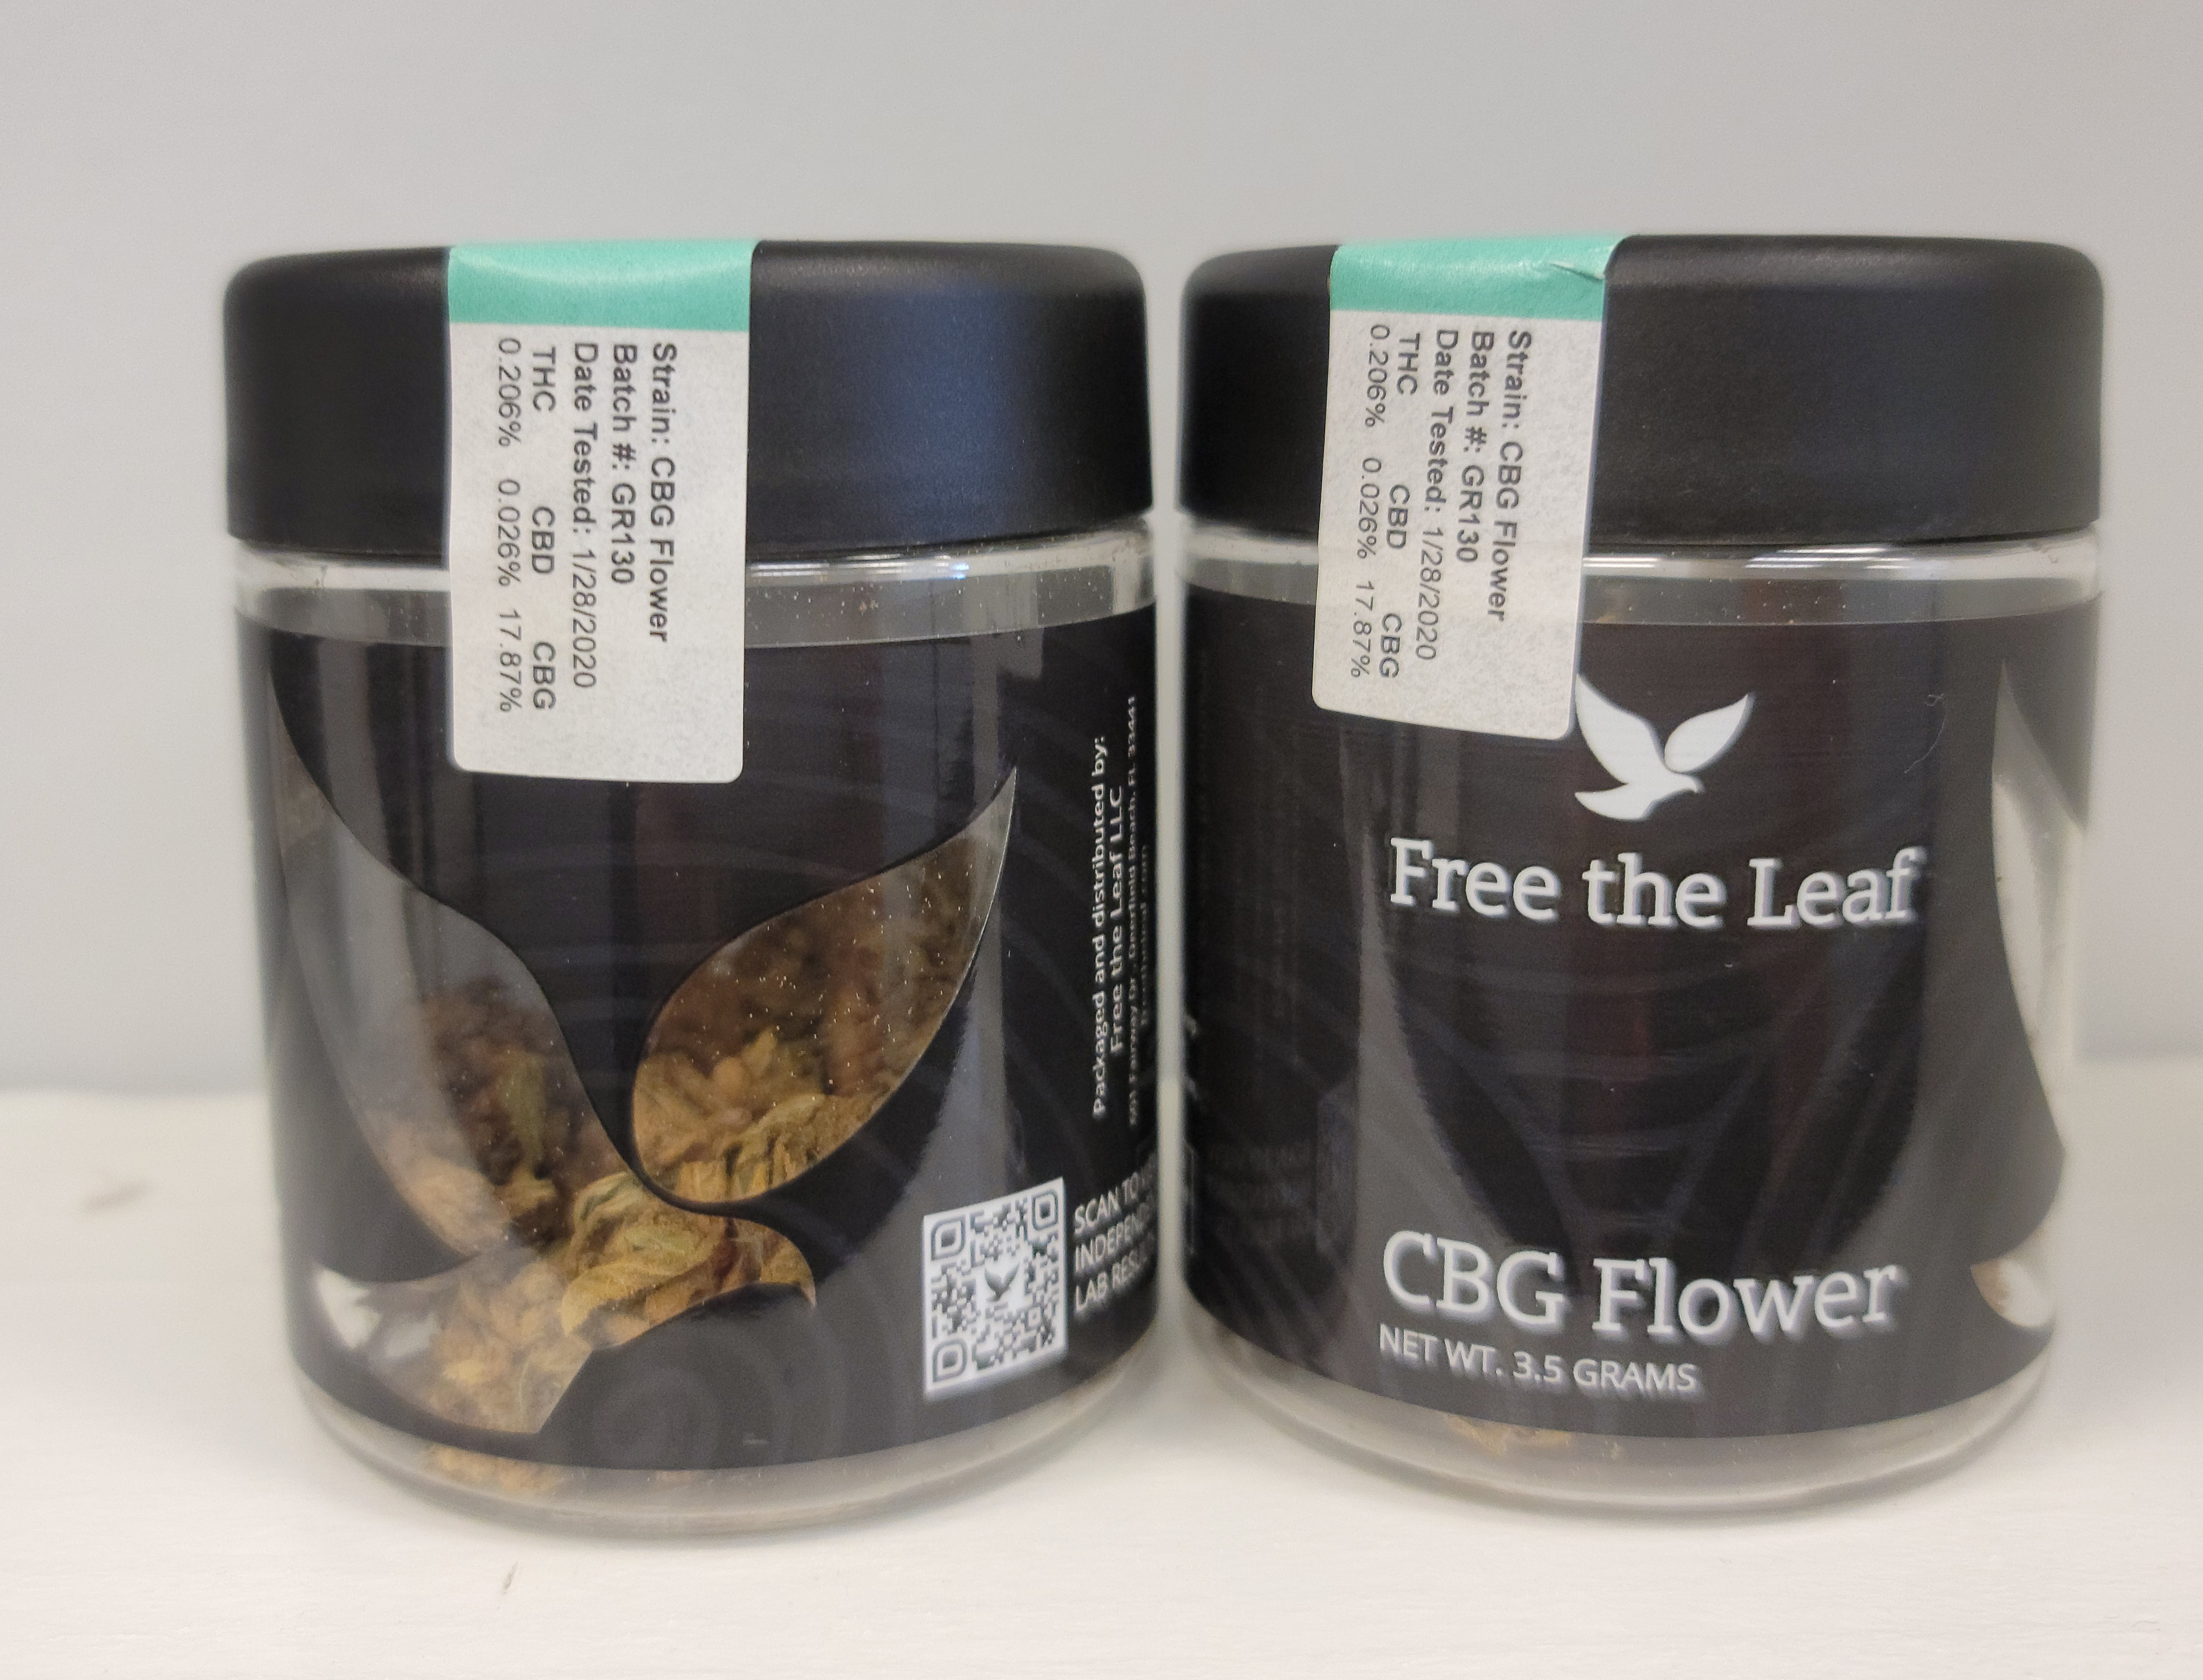 Green Roads CBG Flower promotes healthy appetite, good nights rest and relaxation.  This product contains less than 0.3% THC and is portioned to 3.5 grams.